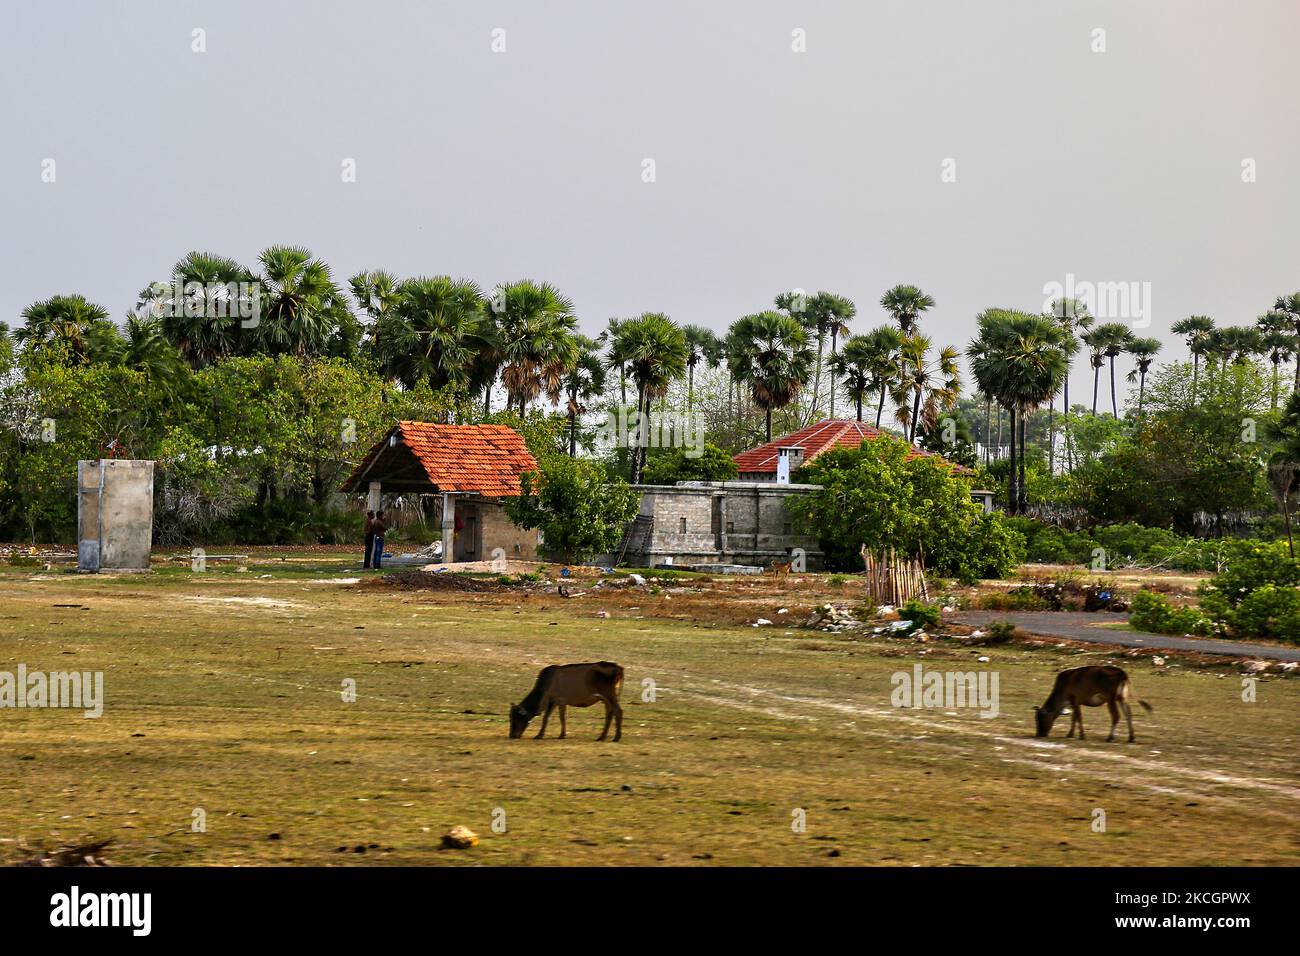 Cows grazing on land by the remains of a buildings destroyed by bombing during the civil war in Kayts, Jaffna, Sri Lanka. Kayts is one of the villages in Velanai Island which is a small island off the coast of the Jaffna Peninsula in northern Sri Lanka. Kayts Island has also been the scene of violence as part of the Sri Lankan Civil War, including the Allaipiddy massacre. This is just one of the many reminders of the deep scars caused during the 26-year long civil war between the Sri Lankan Army and the LTTE (Liberation Tigers of Tamil Eelam). The United Nations estimates about 40,000 people w Stock Photo